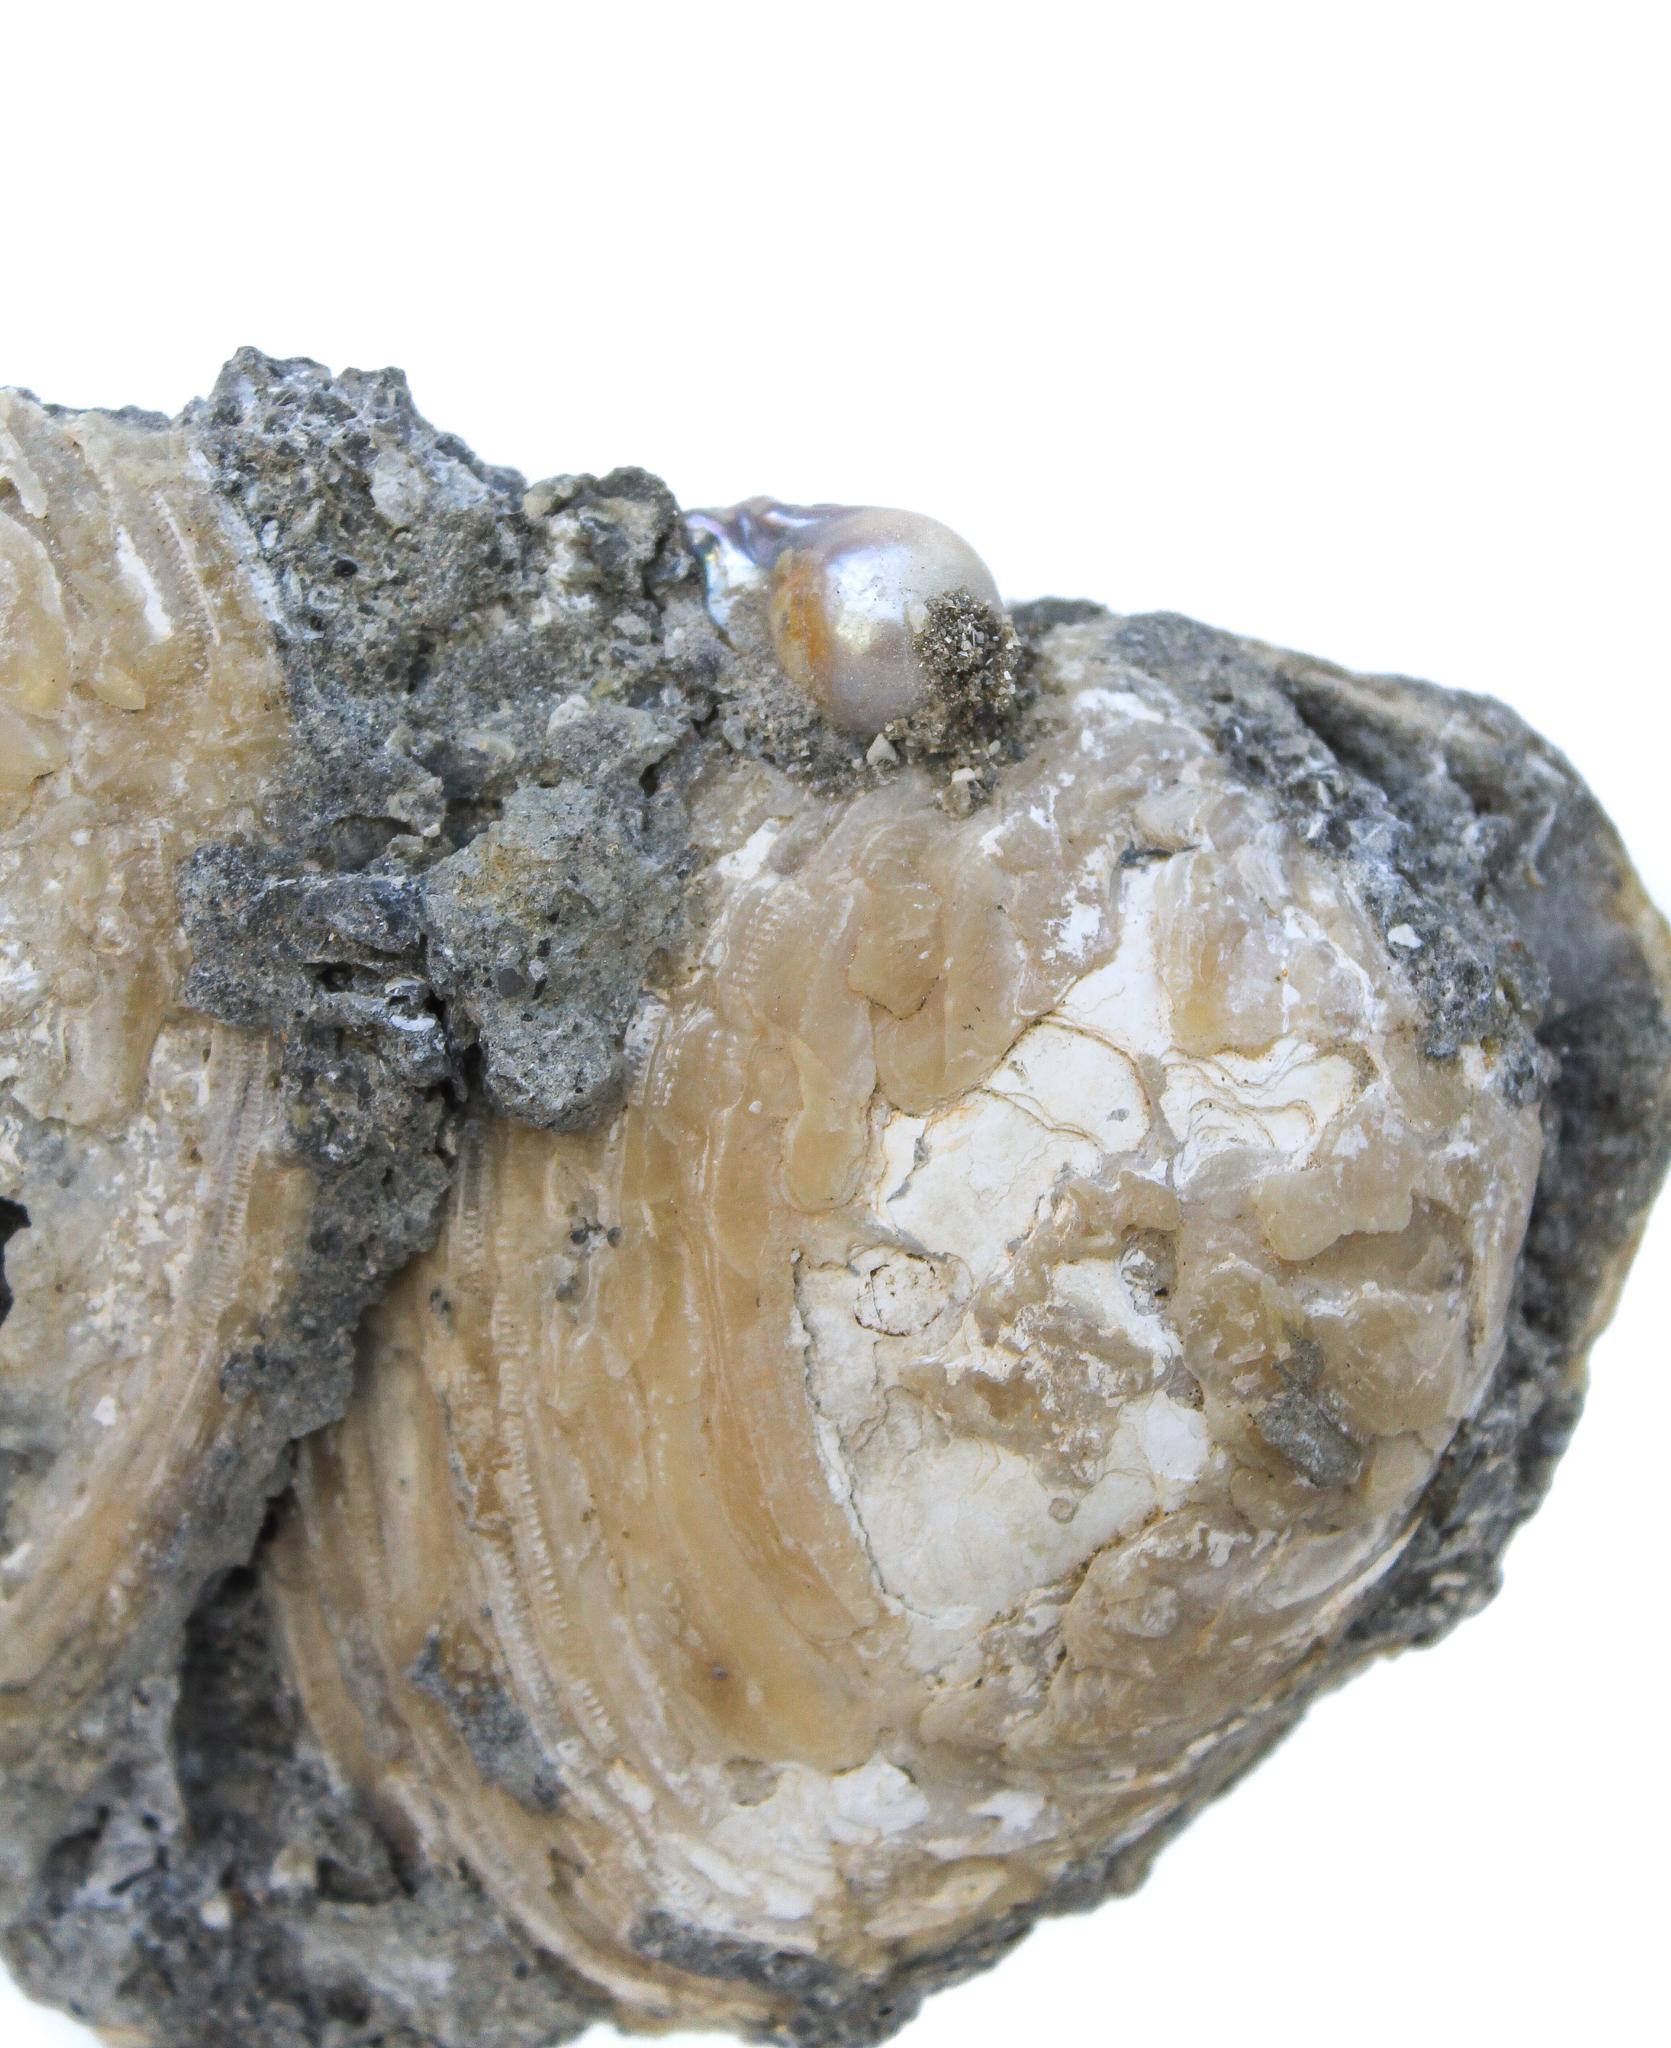 Organic Modern Heart-Shaped Fossil Clamshell with Baroque Pearls on a Polished Agate Base